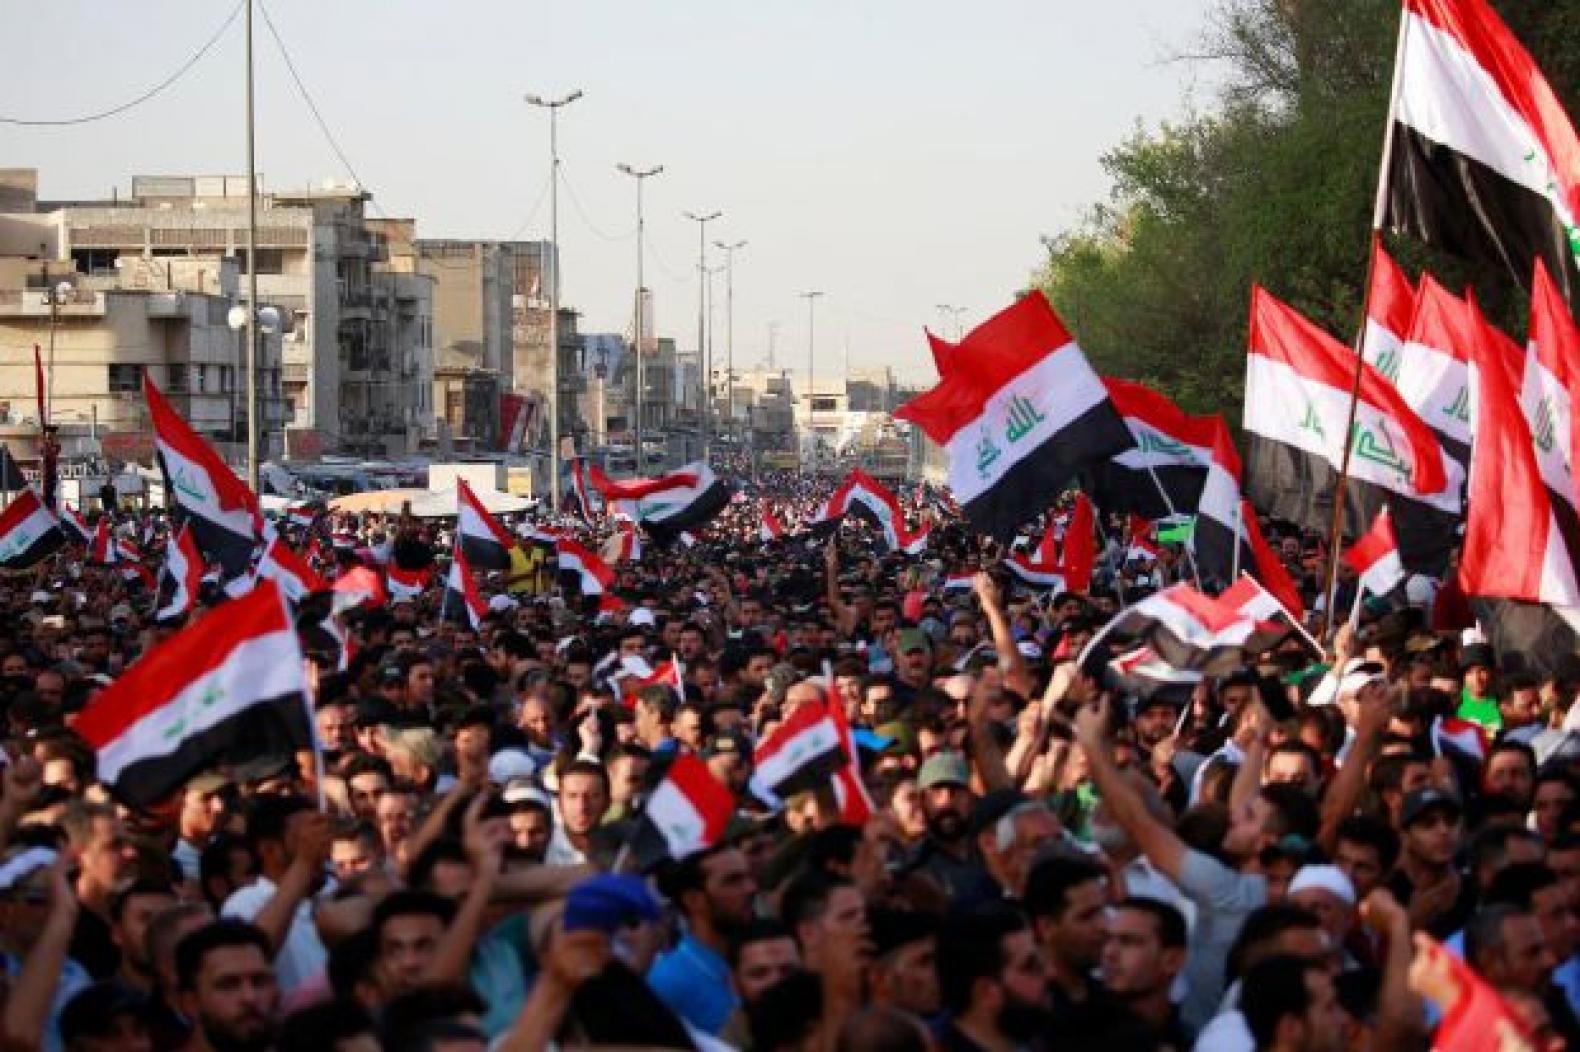 Demonstrations start in front of the Council of Ministers’ building in Baghdad